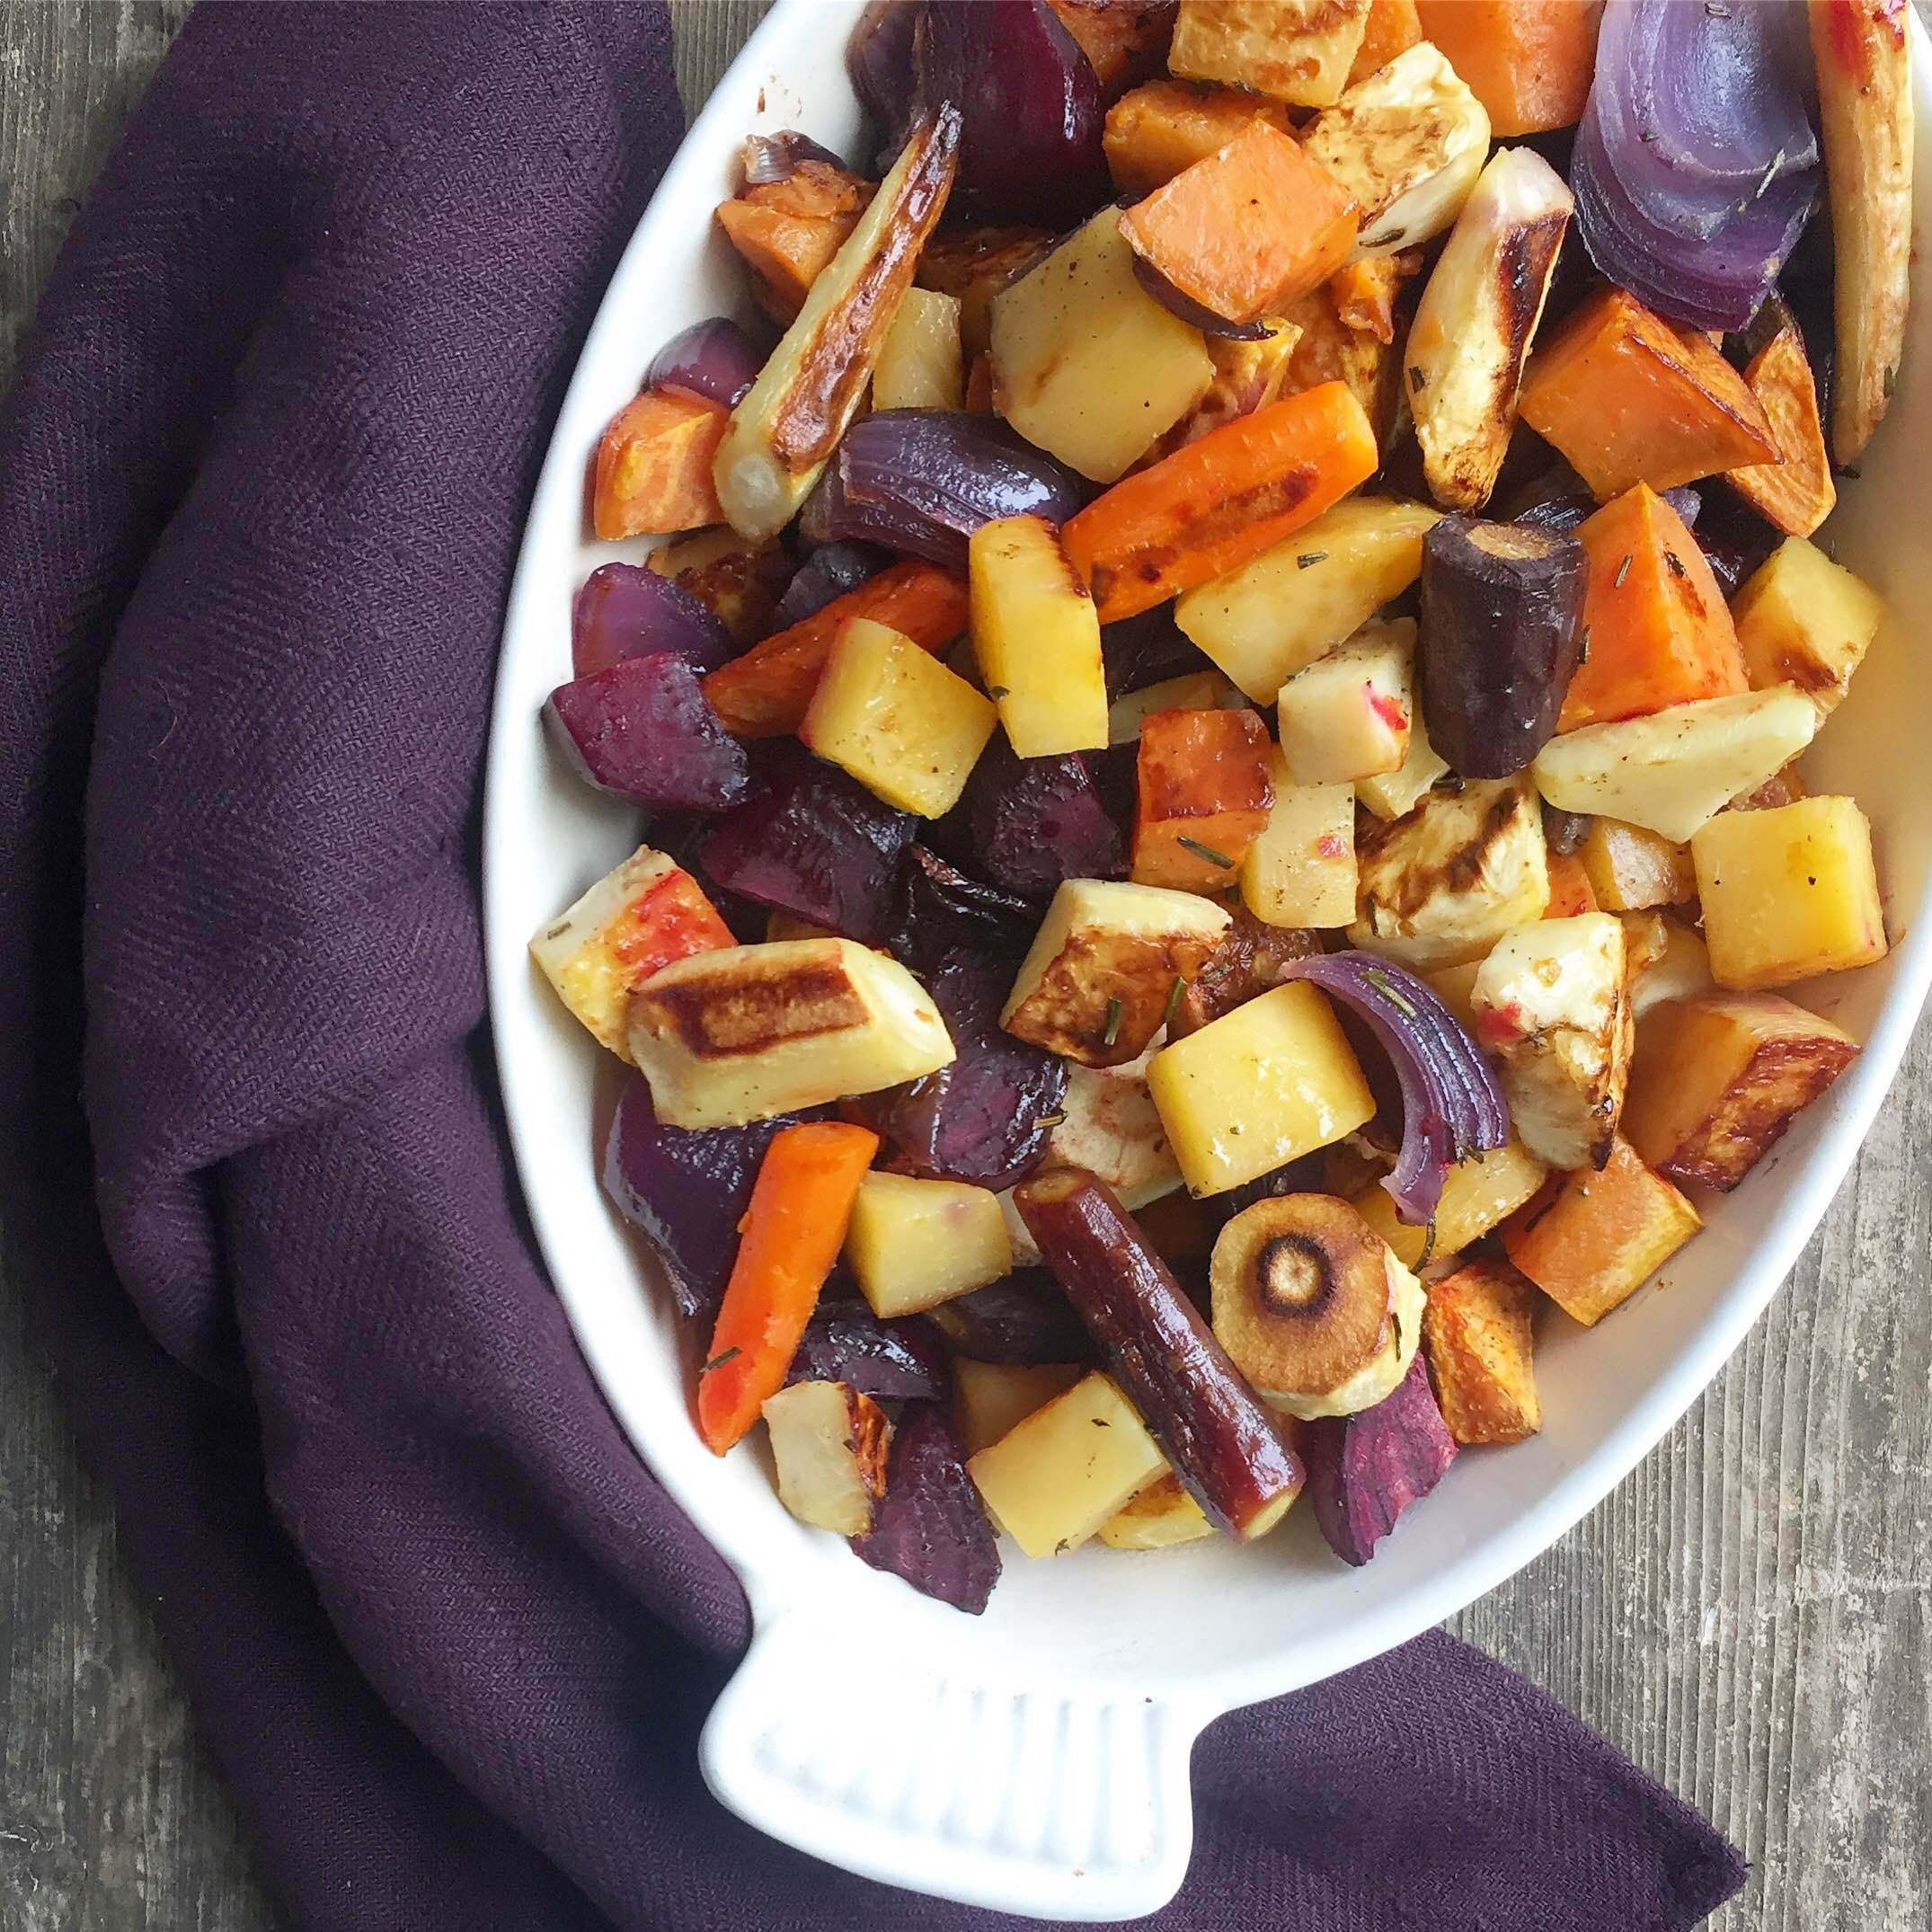 Roasted Vegetables With Balsamic Glaze
 Root Ve ables with a Balsamic Glaze